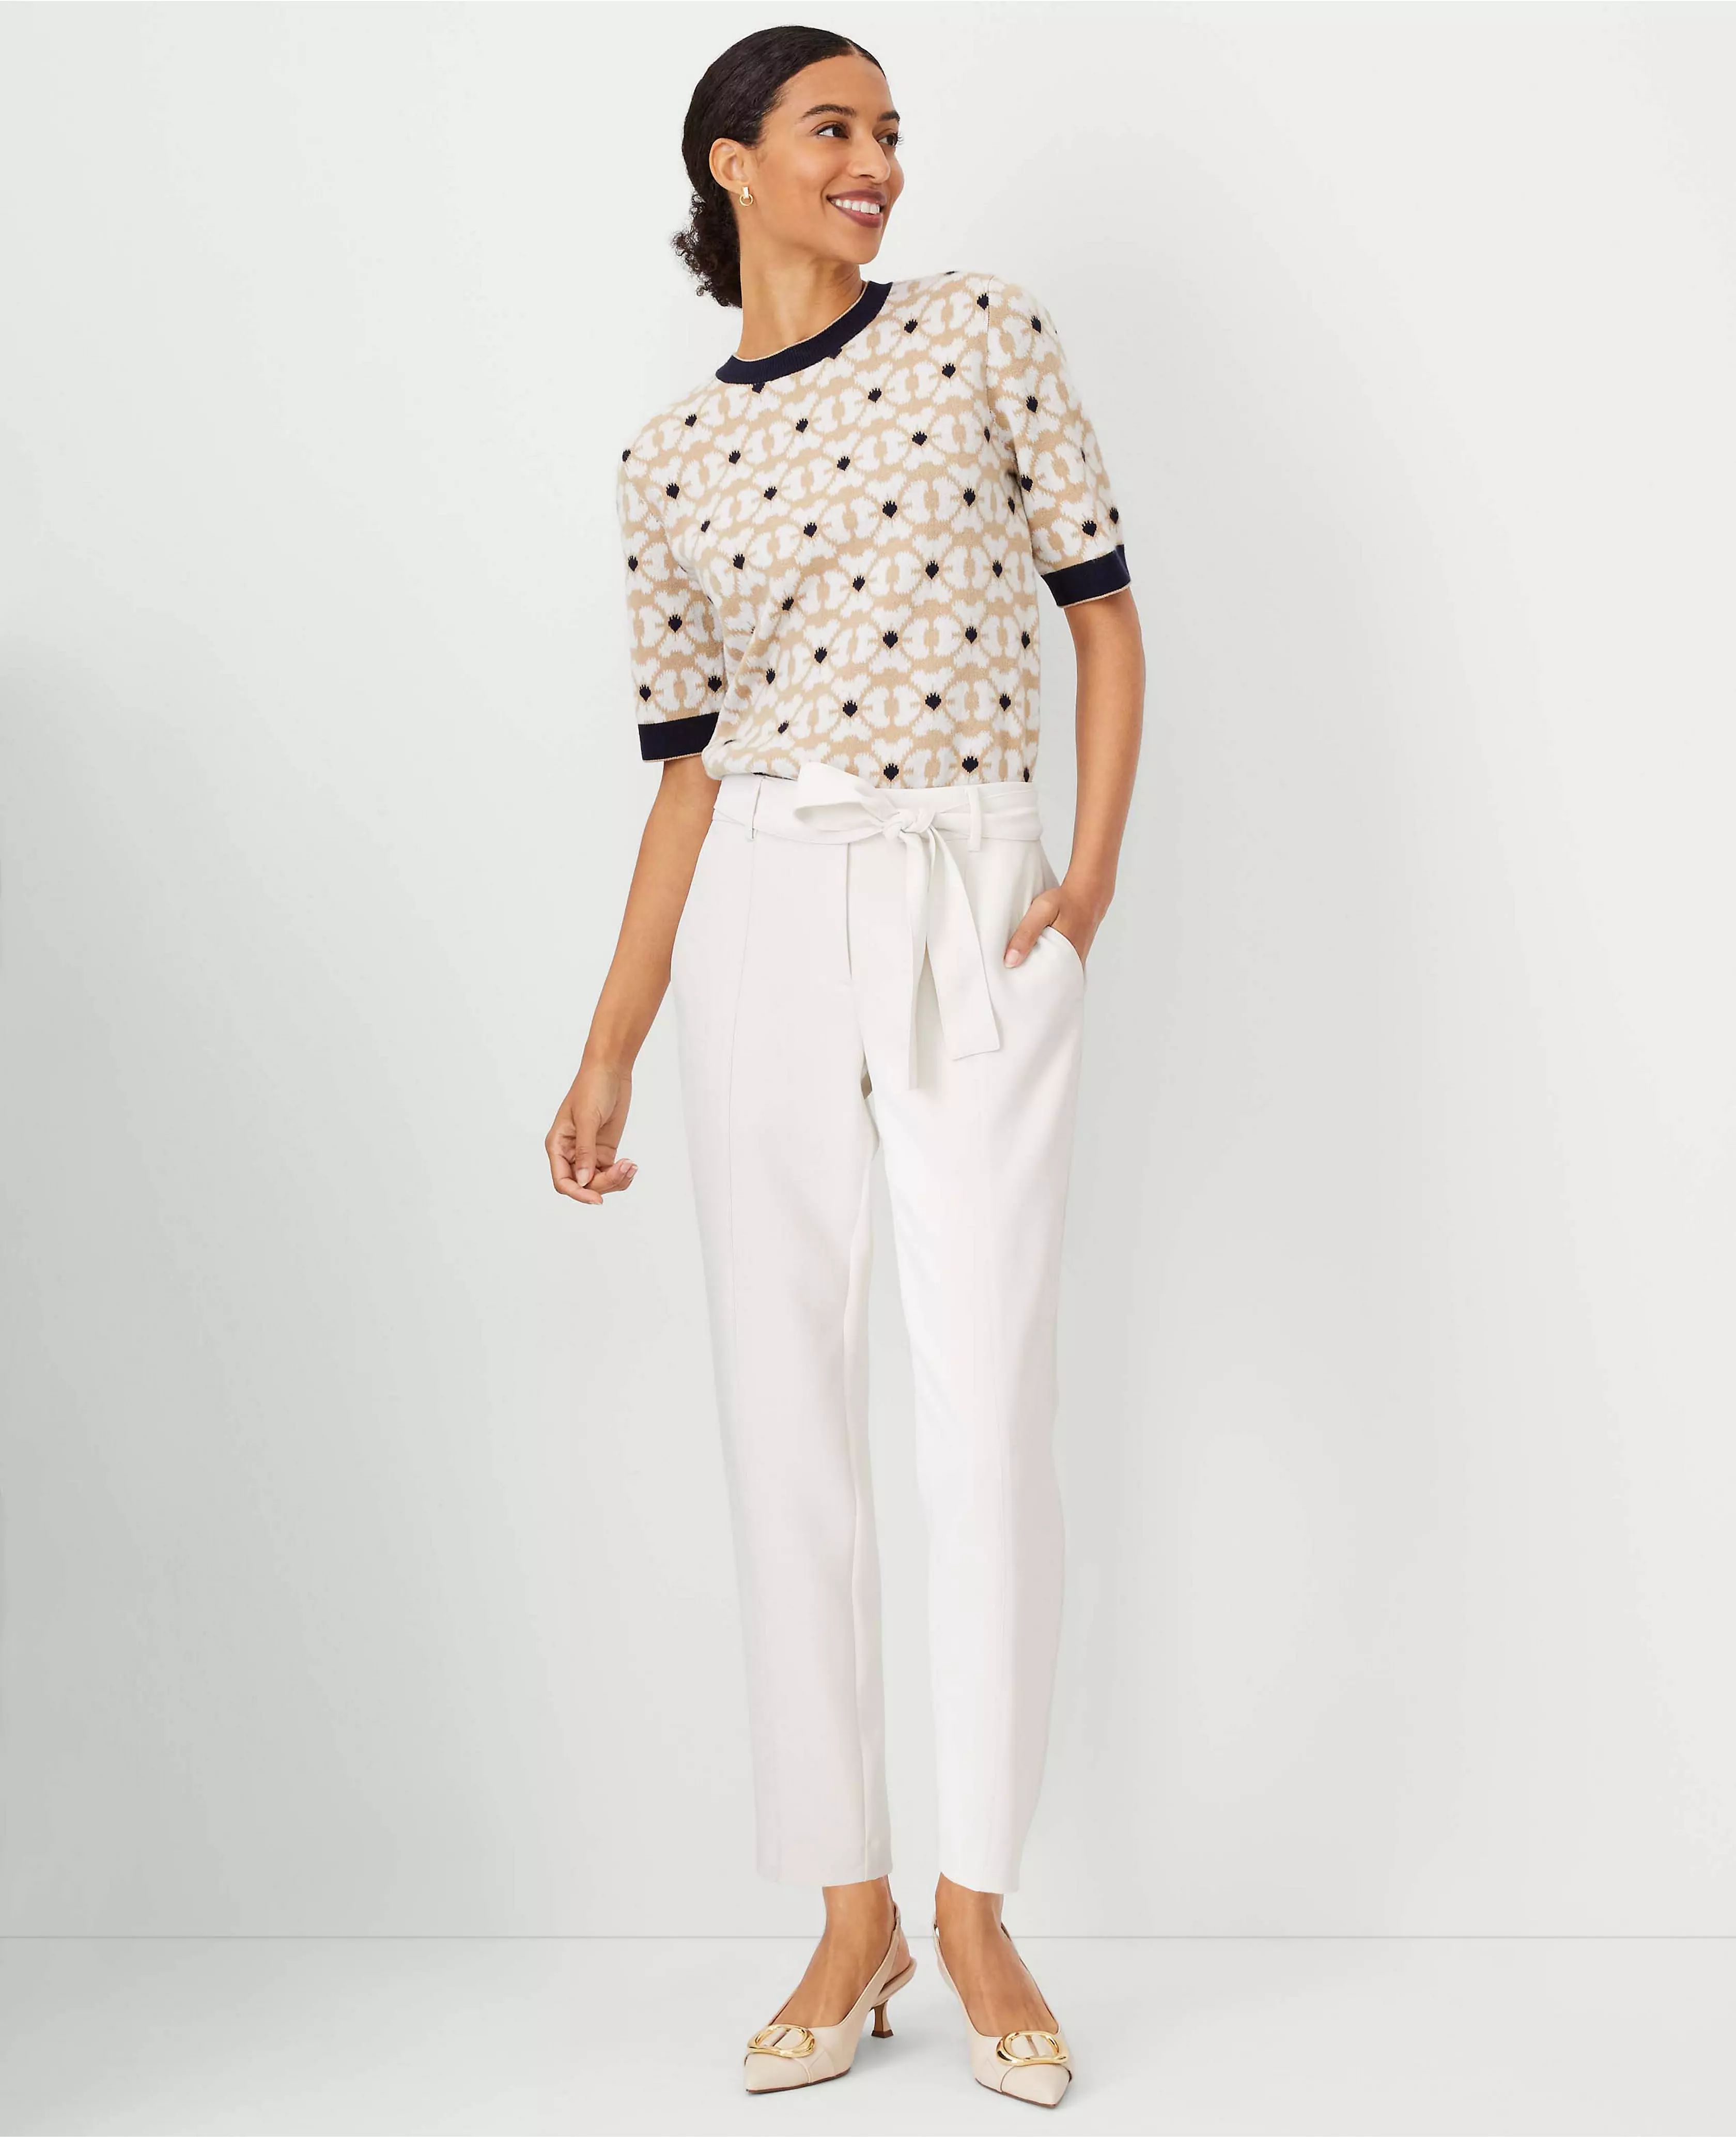 The Petite Tie Waist Ankle Pant in Crepe | Ann Taylor (US)